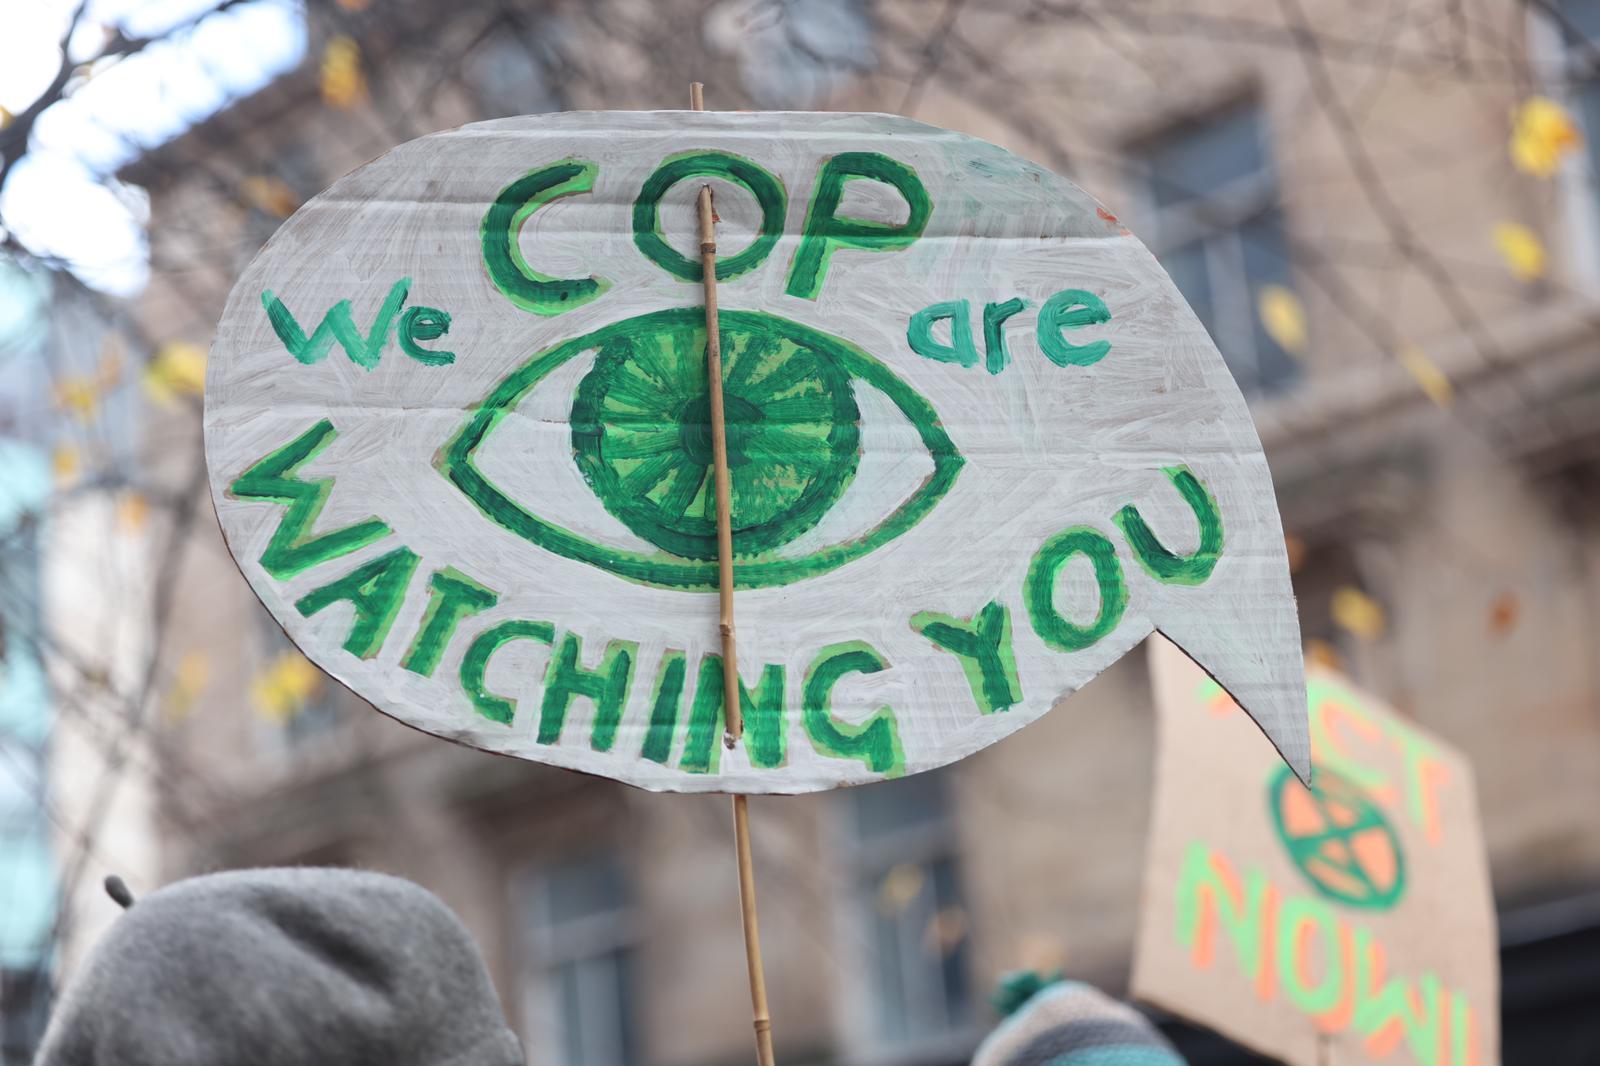 The voices missing from COP26